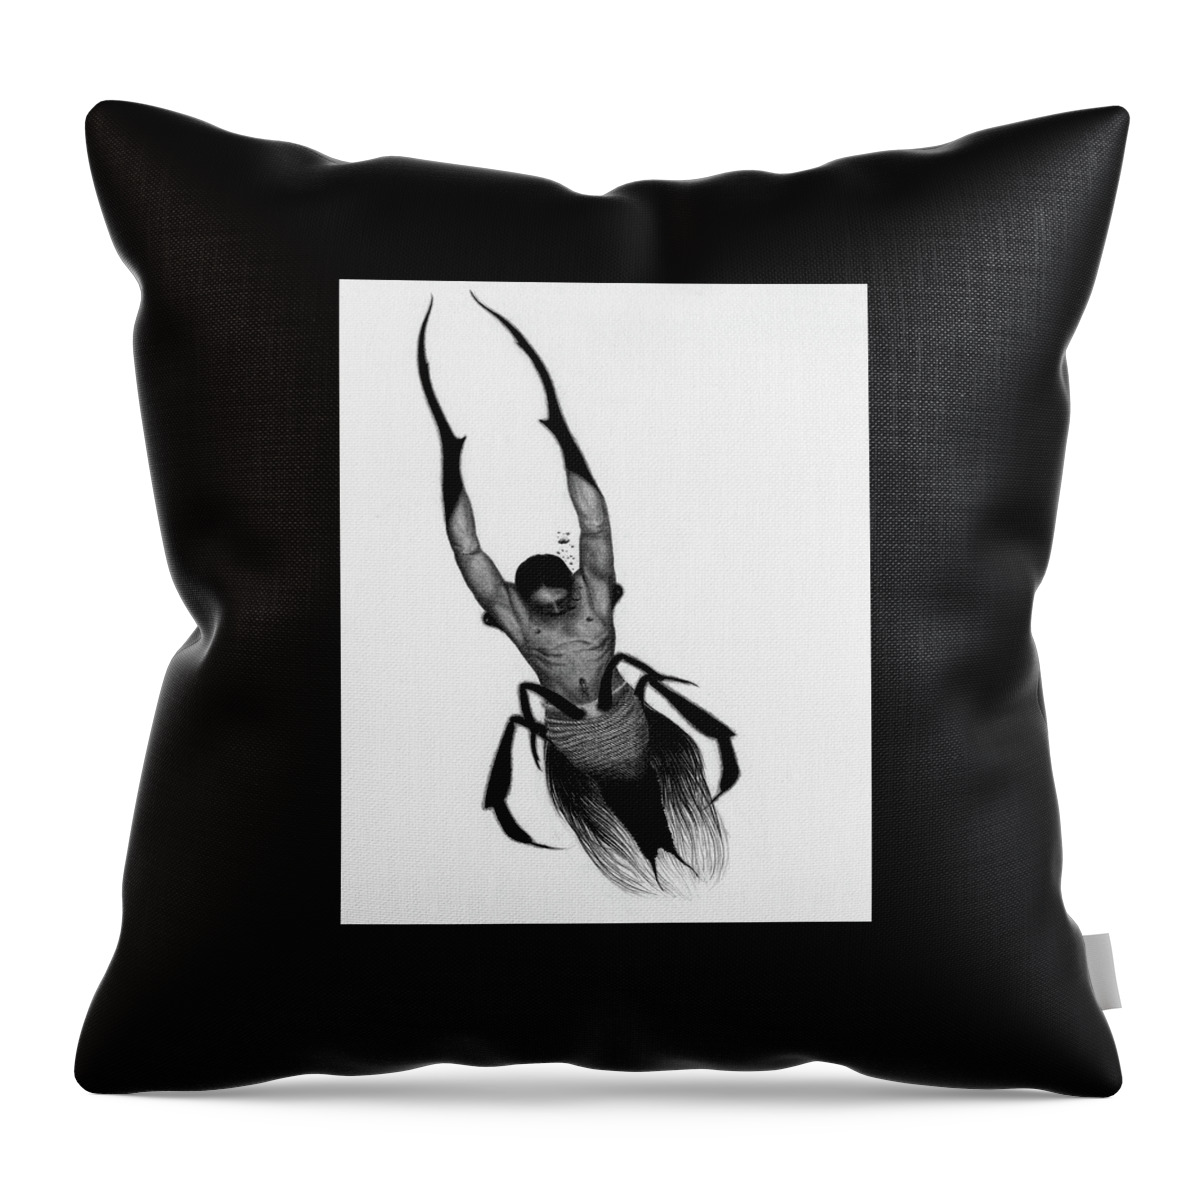 Horror Throw Pillow featuring the drawing Drowned Samurai Kaito - Artwork by Ryan Nieves